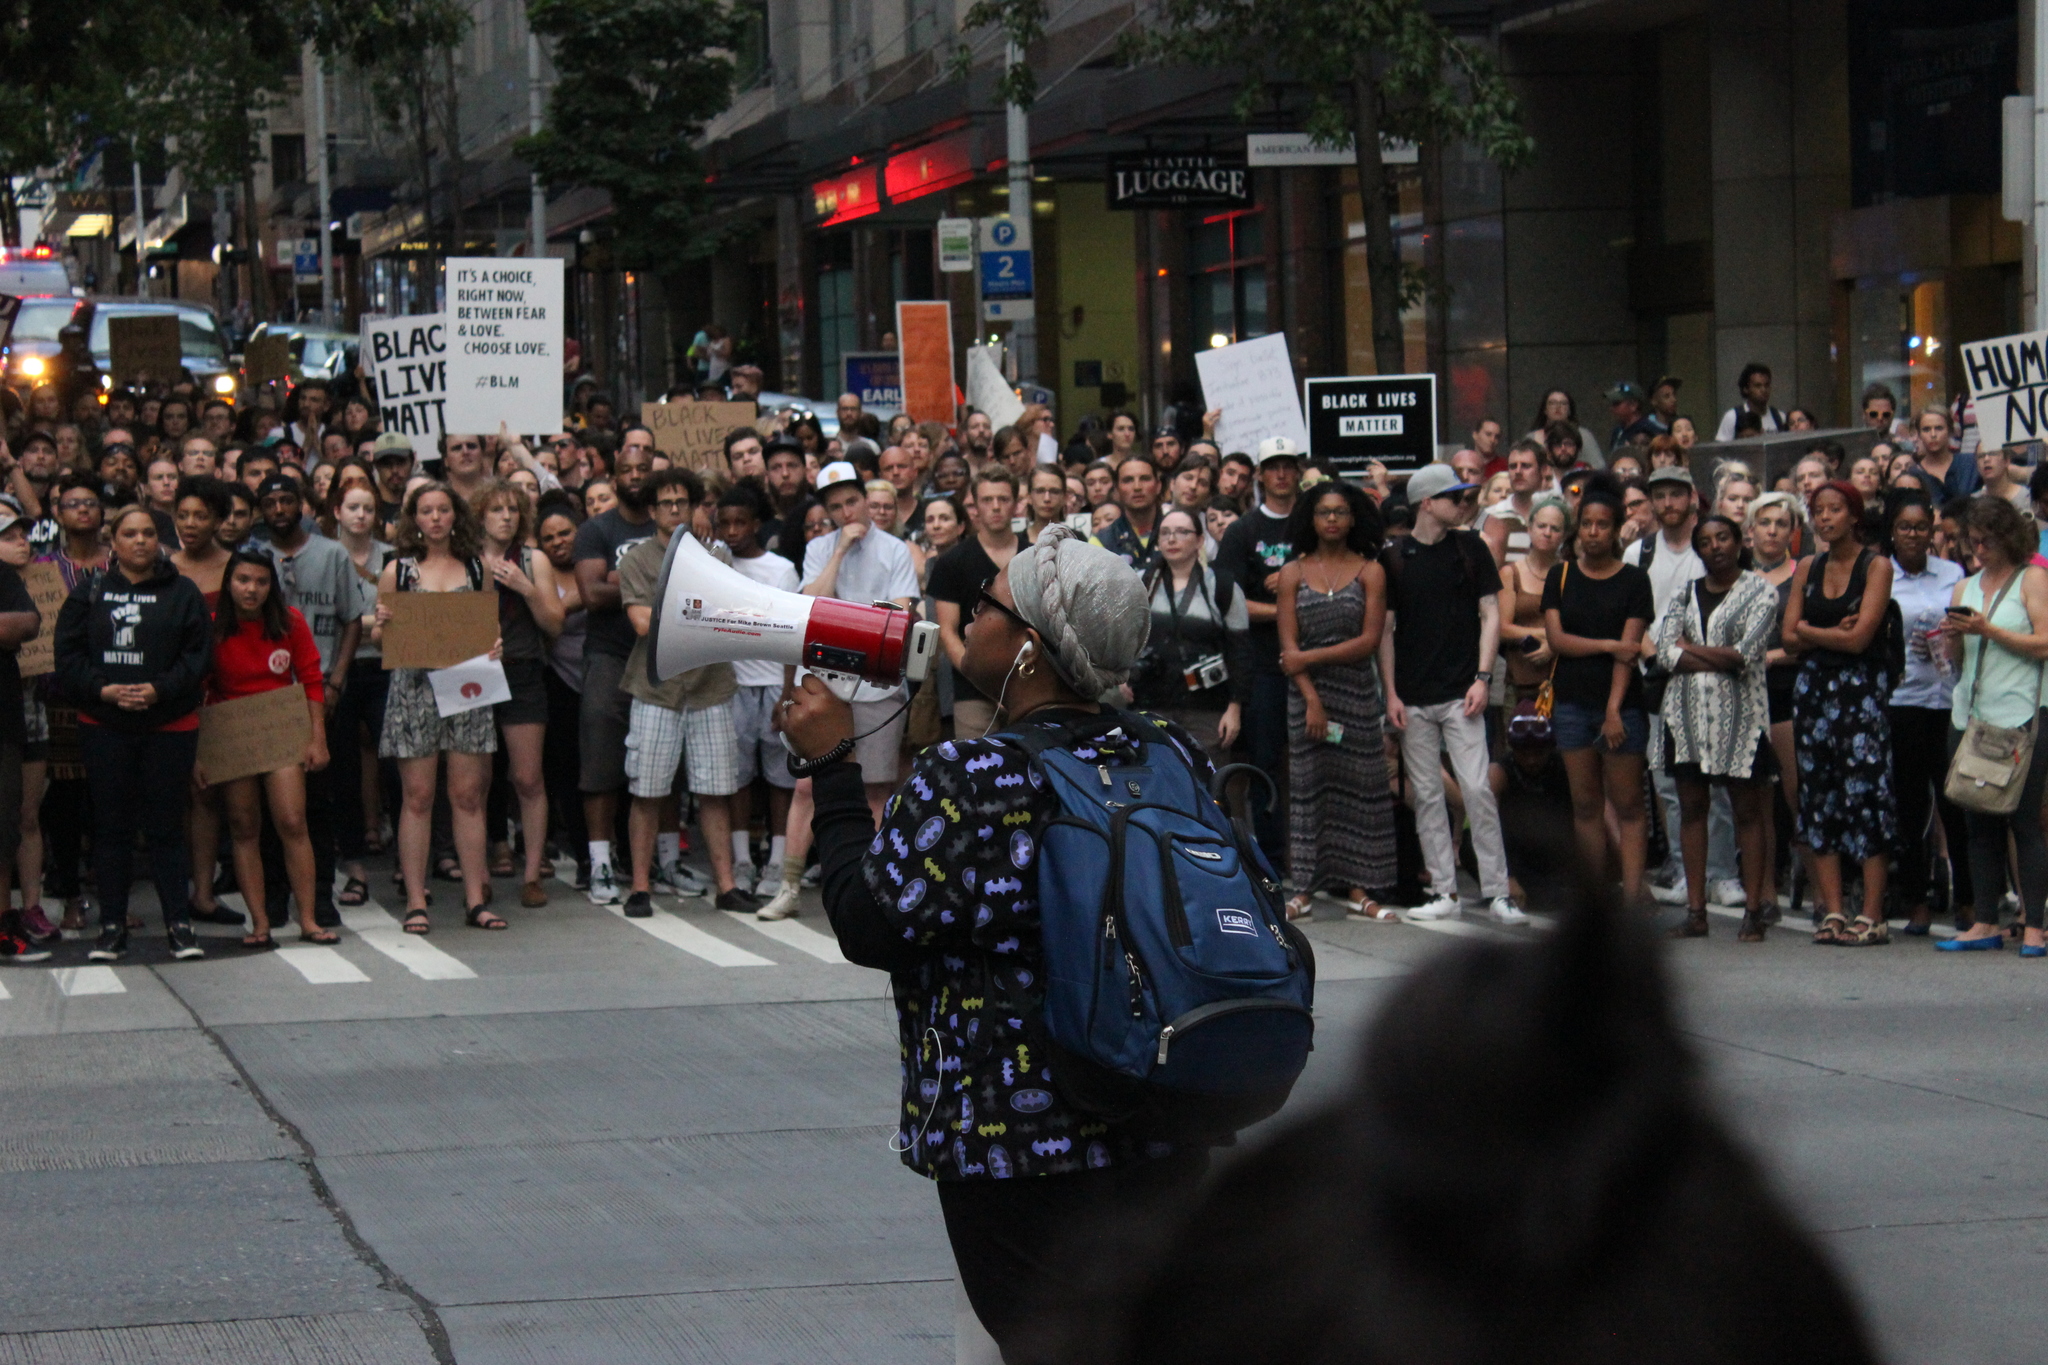 “The Status Quo Is Over”: Peaceful Black Lives Matter Demonstration Again Consumes Downtown